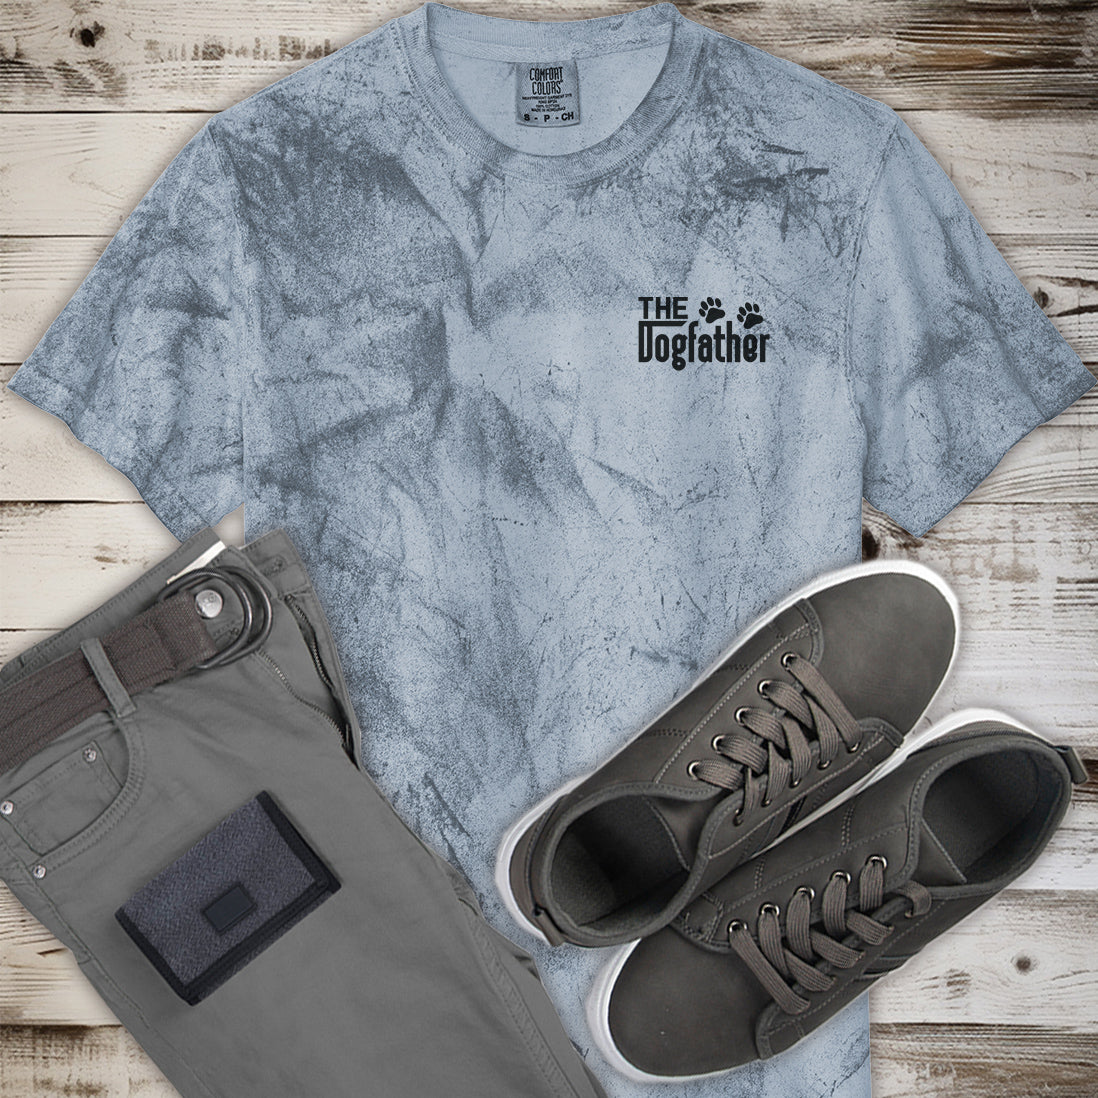 Cool "The Dog Father" Tie-Dyed Tee for Your Favorite Dog Father!